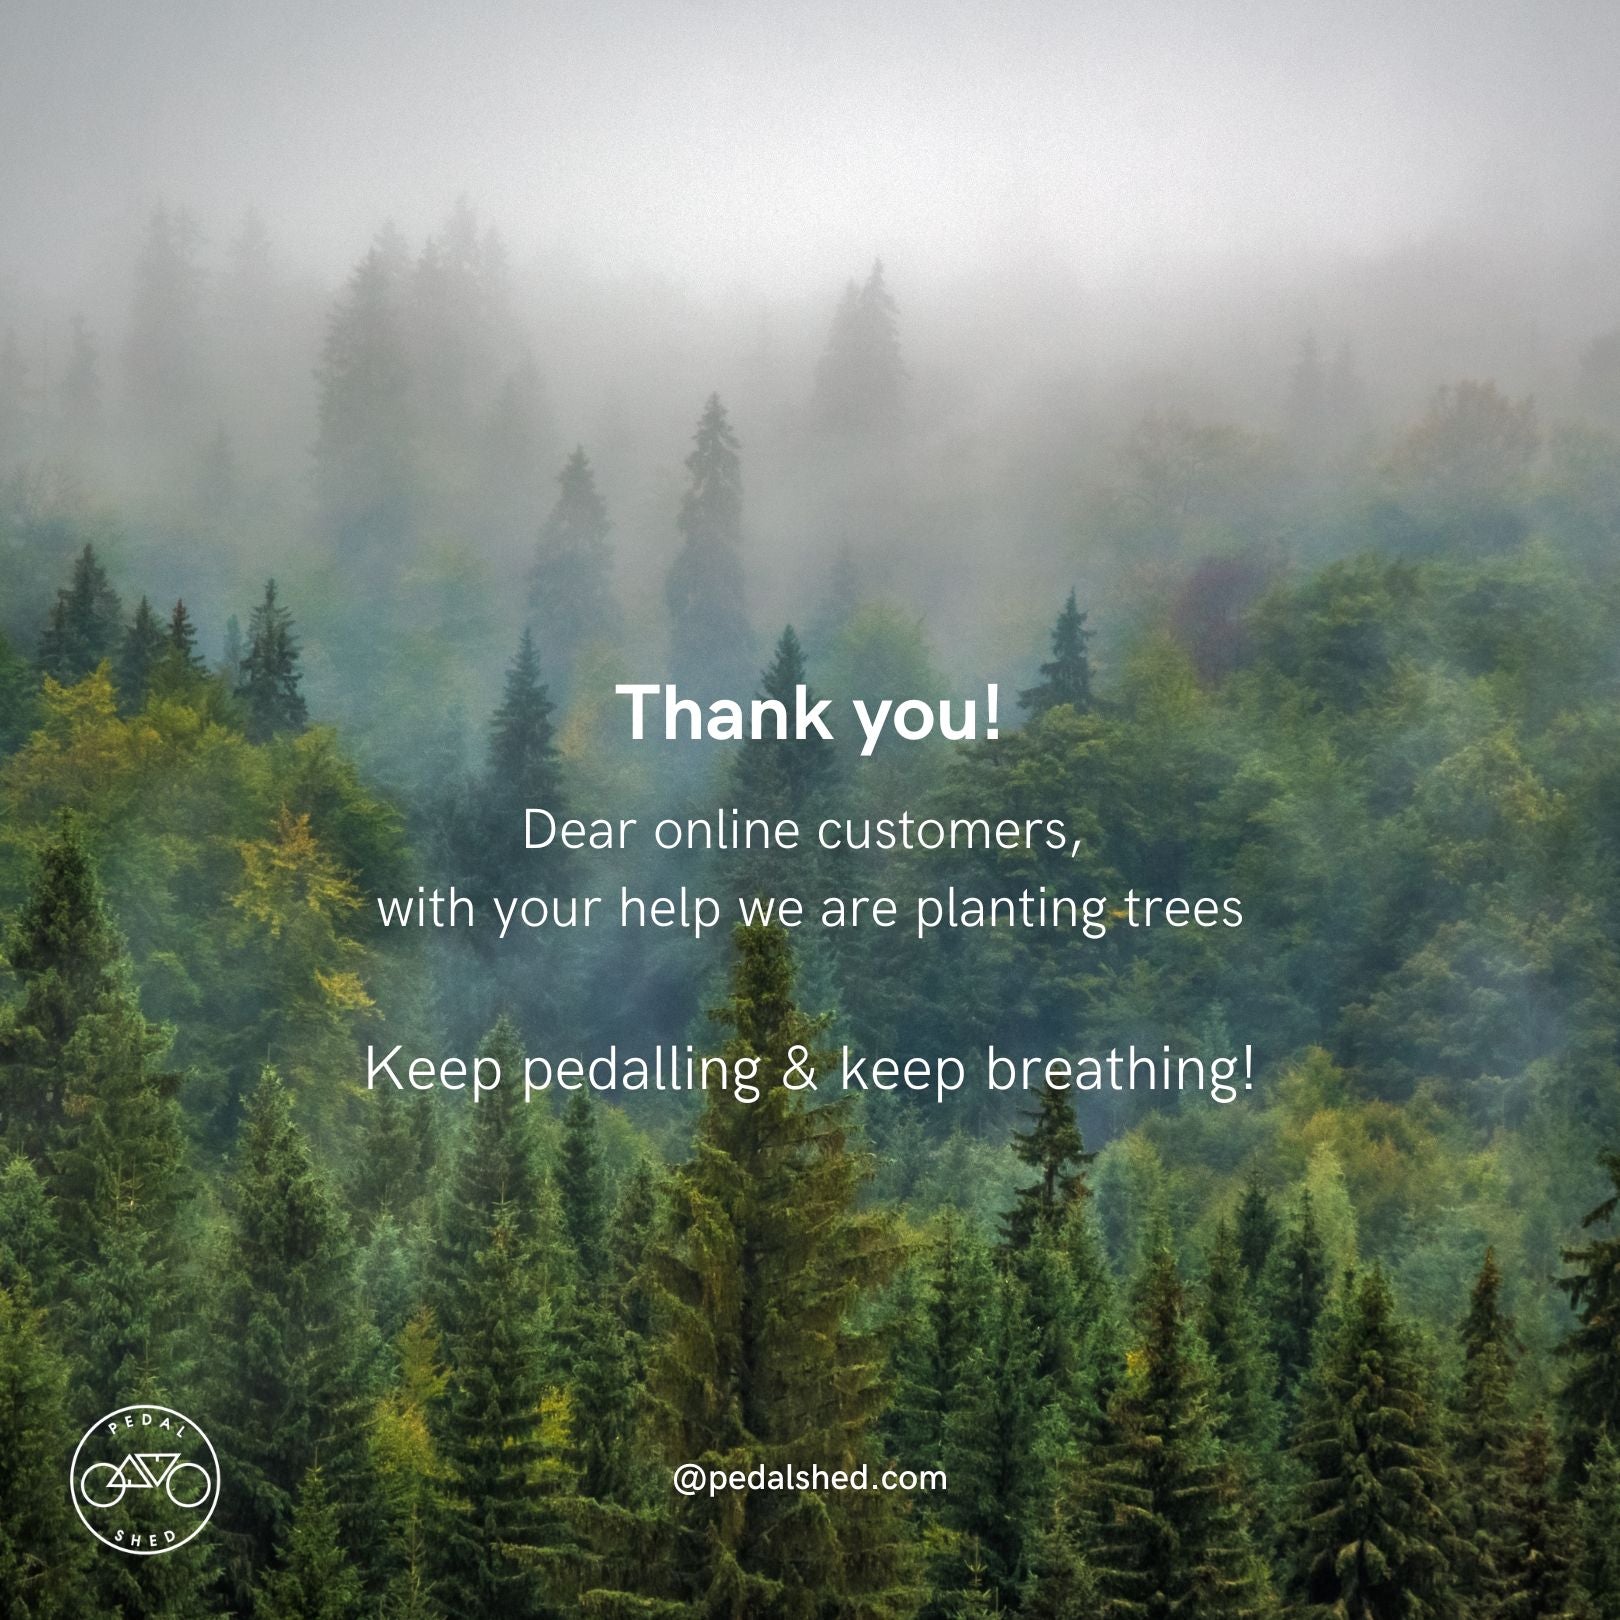 Thank you dear customers, together we've planted 66 trees!